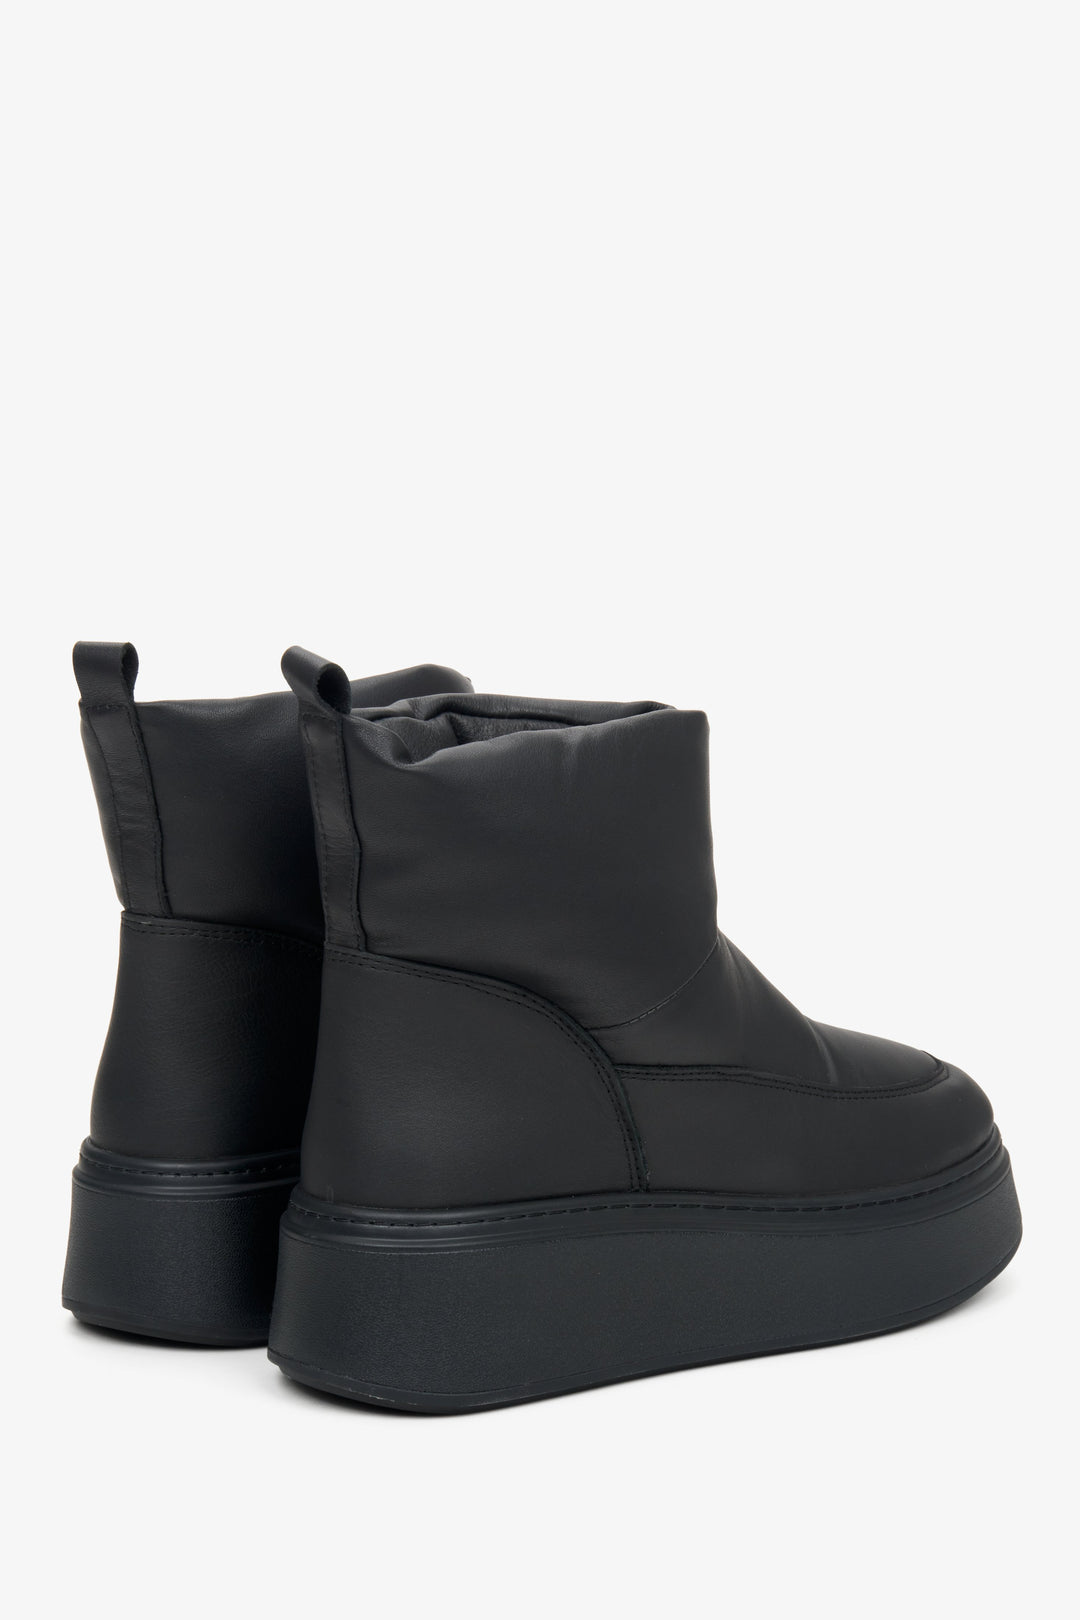 Estro women's black leather winter snow boots with natural fur - close-up on the heel and side seam.